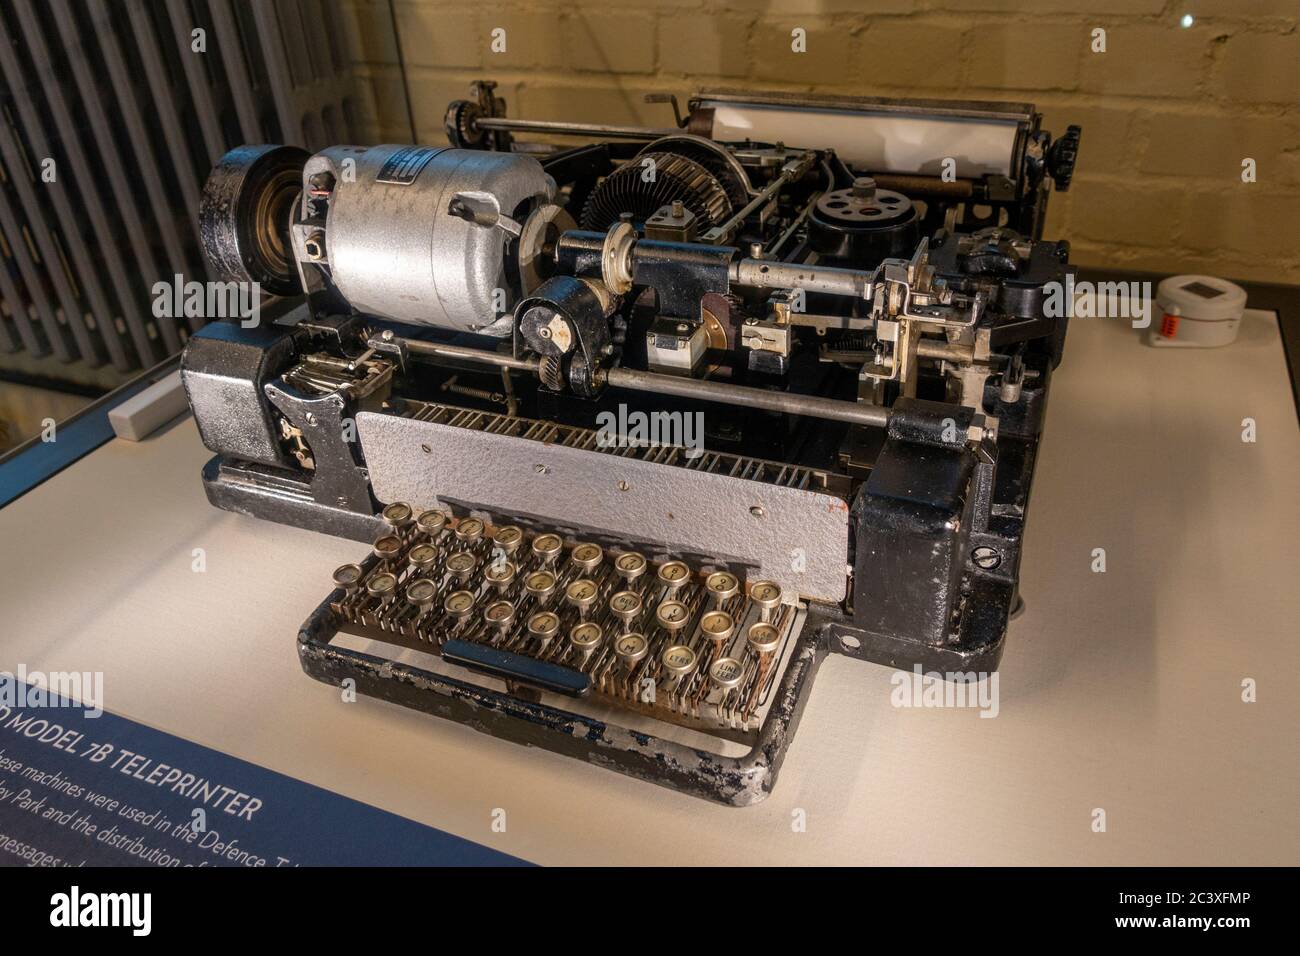 Creed Model 7B teleprinter on display in Bletchley Park, Bletchley, Buckinghamshire, UK. Stock Photo